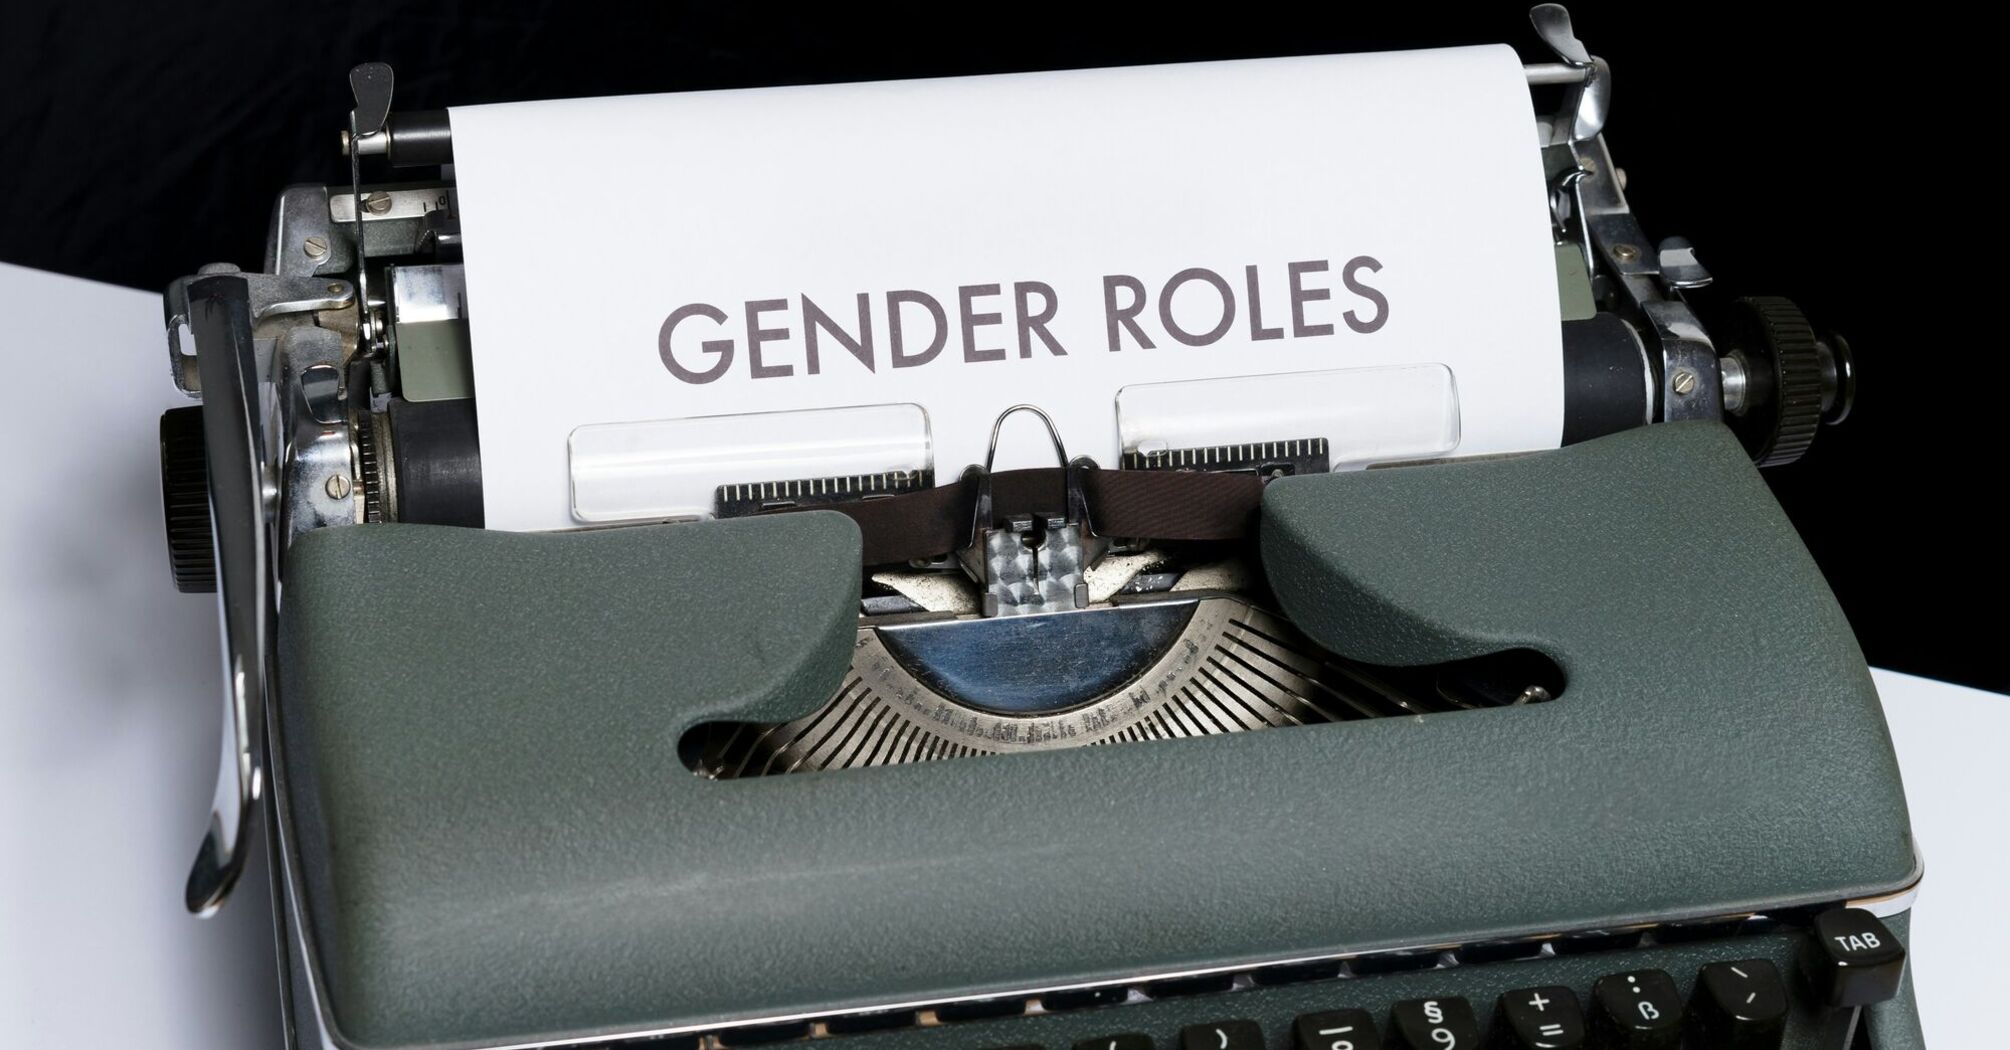 A vintage typewriter with a sheet of paper inserted that has "GENDER ROLES" typed on it